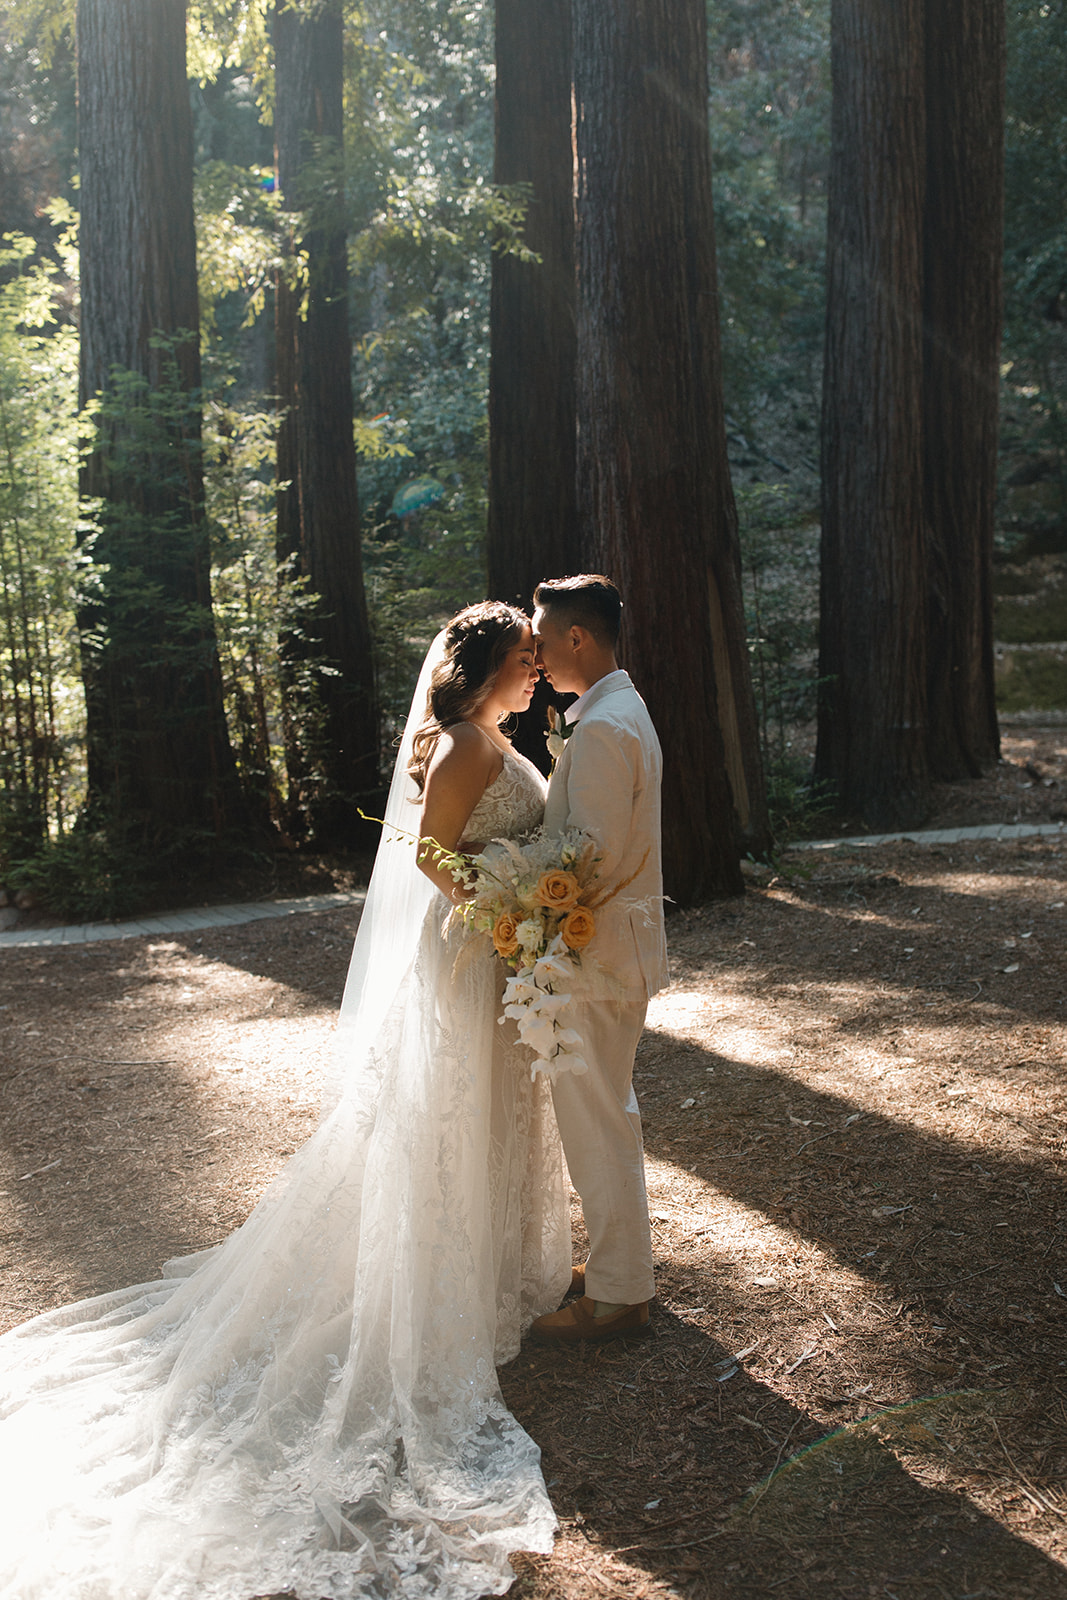 Wedding at Waterfall Lodge and Retreat in Ben Lomond, CA